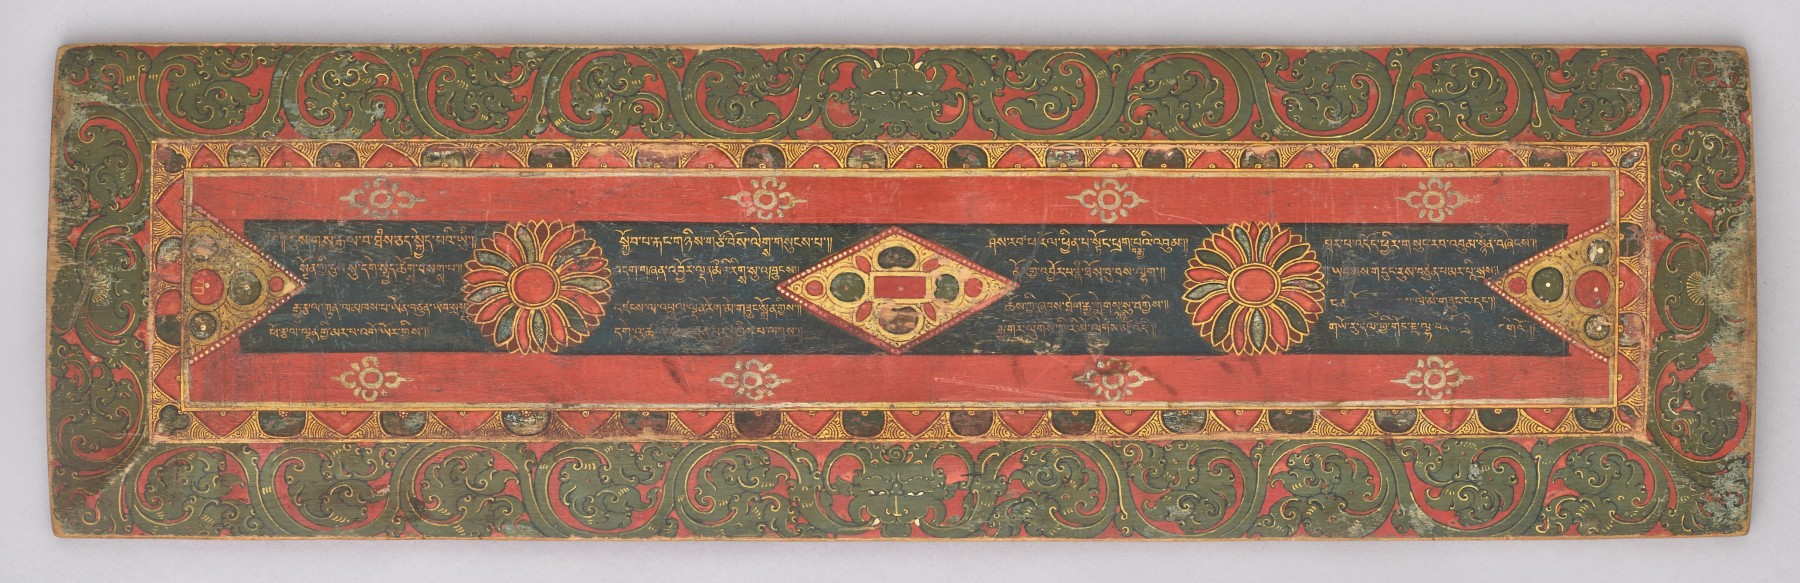 this remarkable cover is an aesthetically elegant and rare object and contains a sixteen-lined poem, beautifully executed in calligraphy by Marpa Gyor